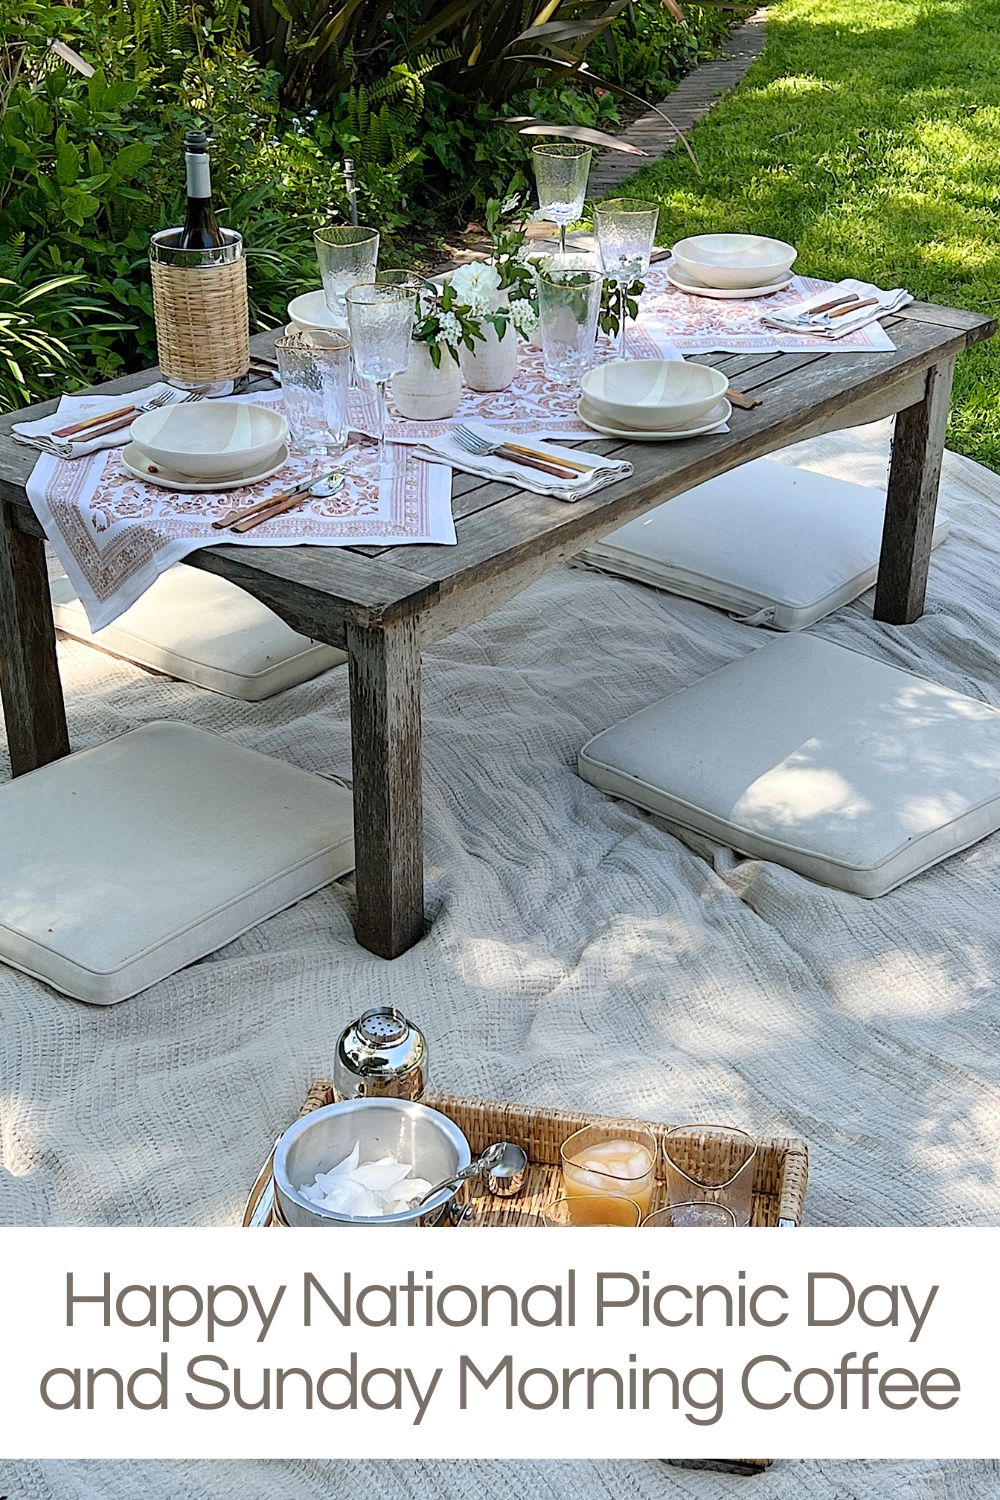 It's National Picnic Day and I thought it might be fun to set up an amazing picnic in our backyard. Isn't this amazing?